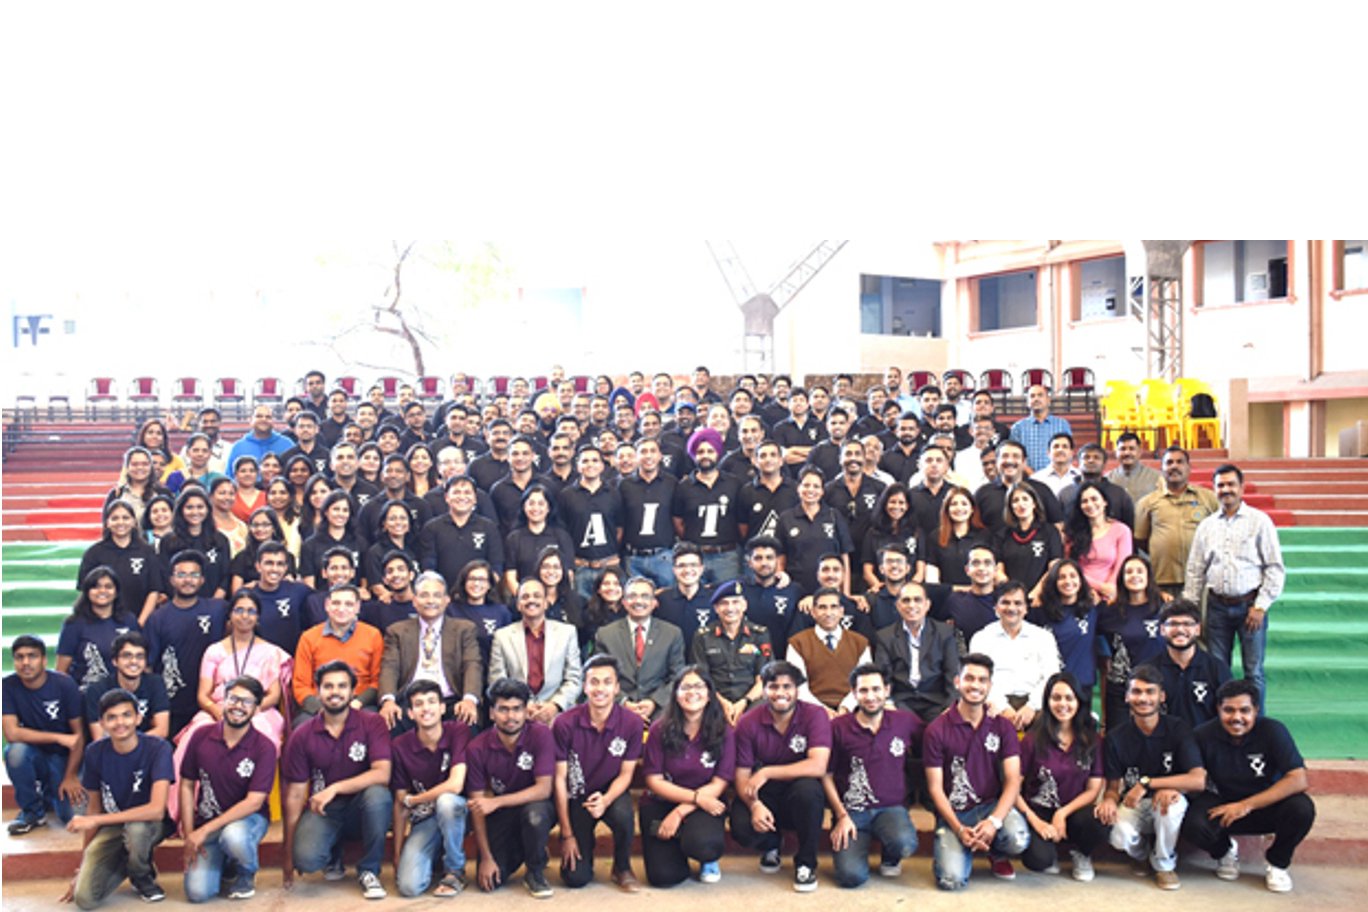 Alumni Meet 2018 Army Institute of Technology - [AIT], Pune in Pune